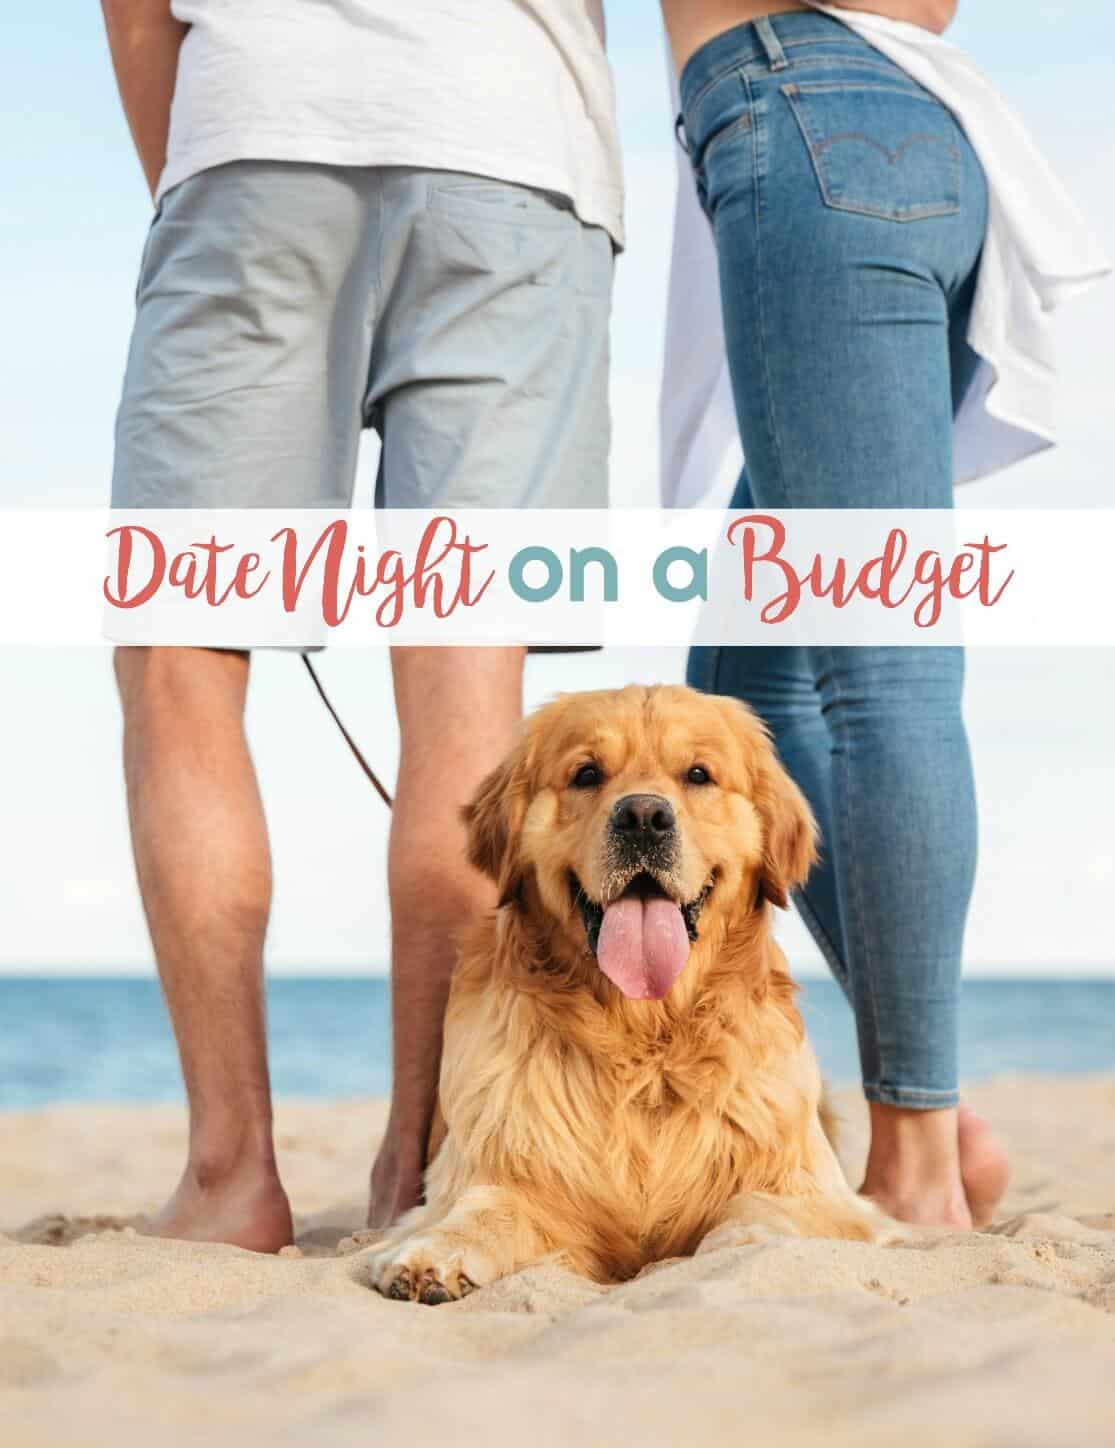 Date Night on a Budget | Healthy Living in body and Mind